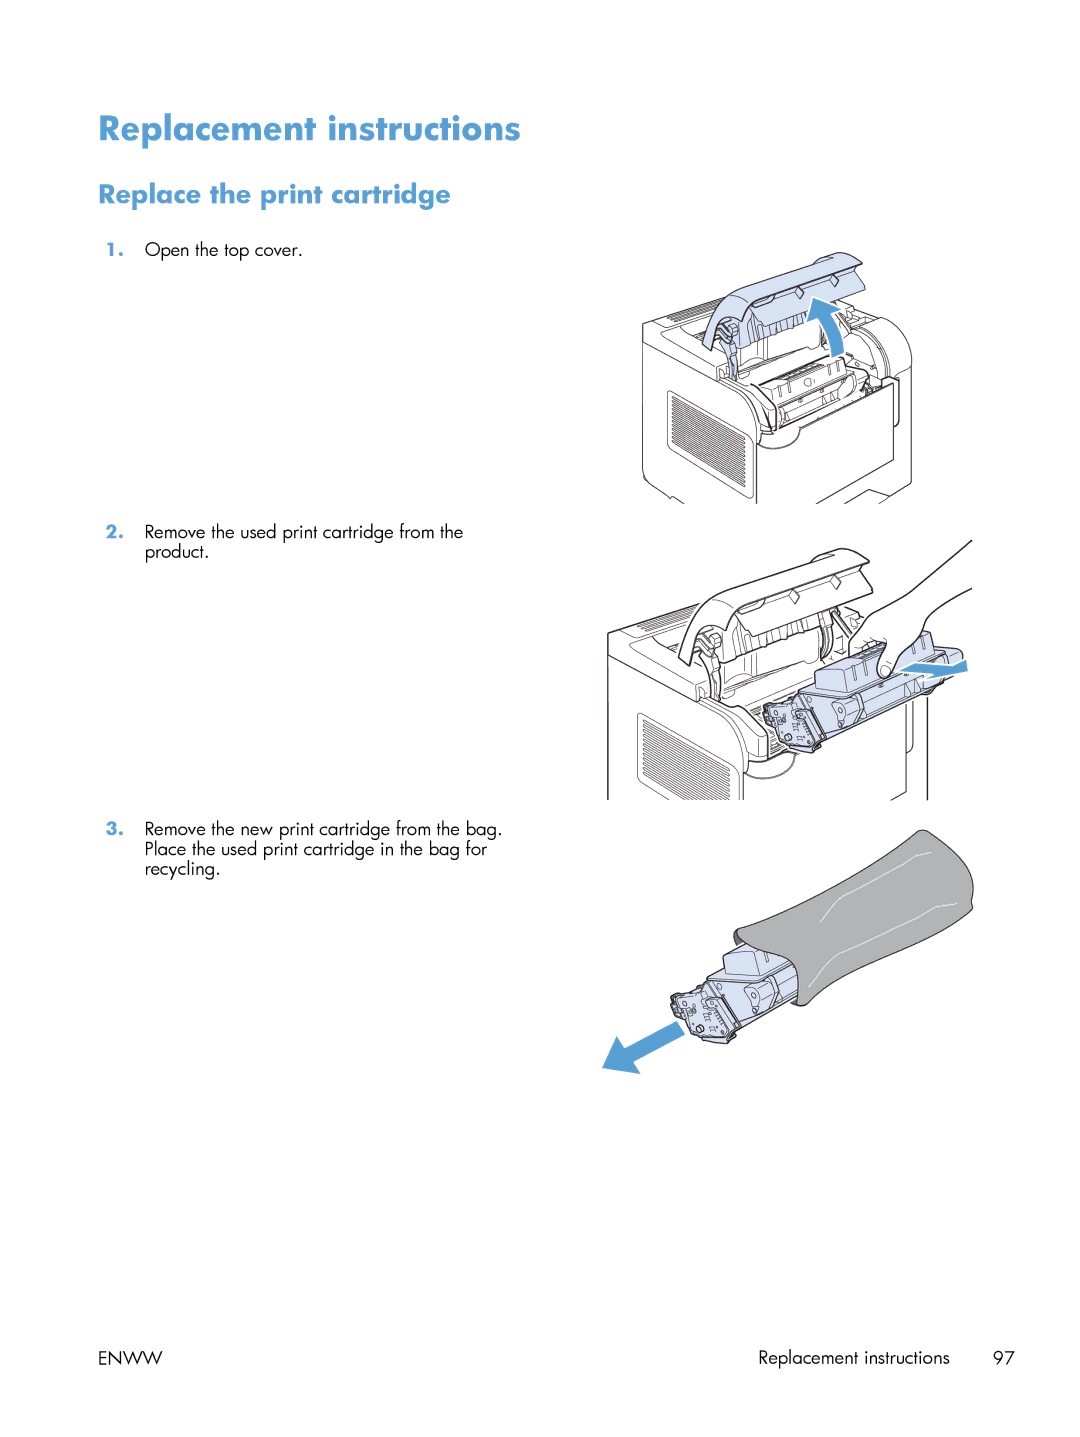 HP Laser M601, Laser M602, Laser M603 manual Replacement instructions, Replace the print cartridge 